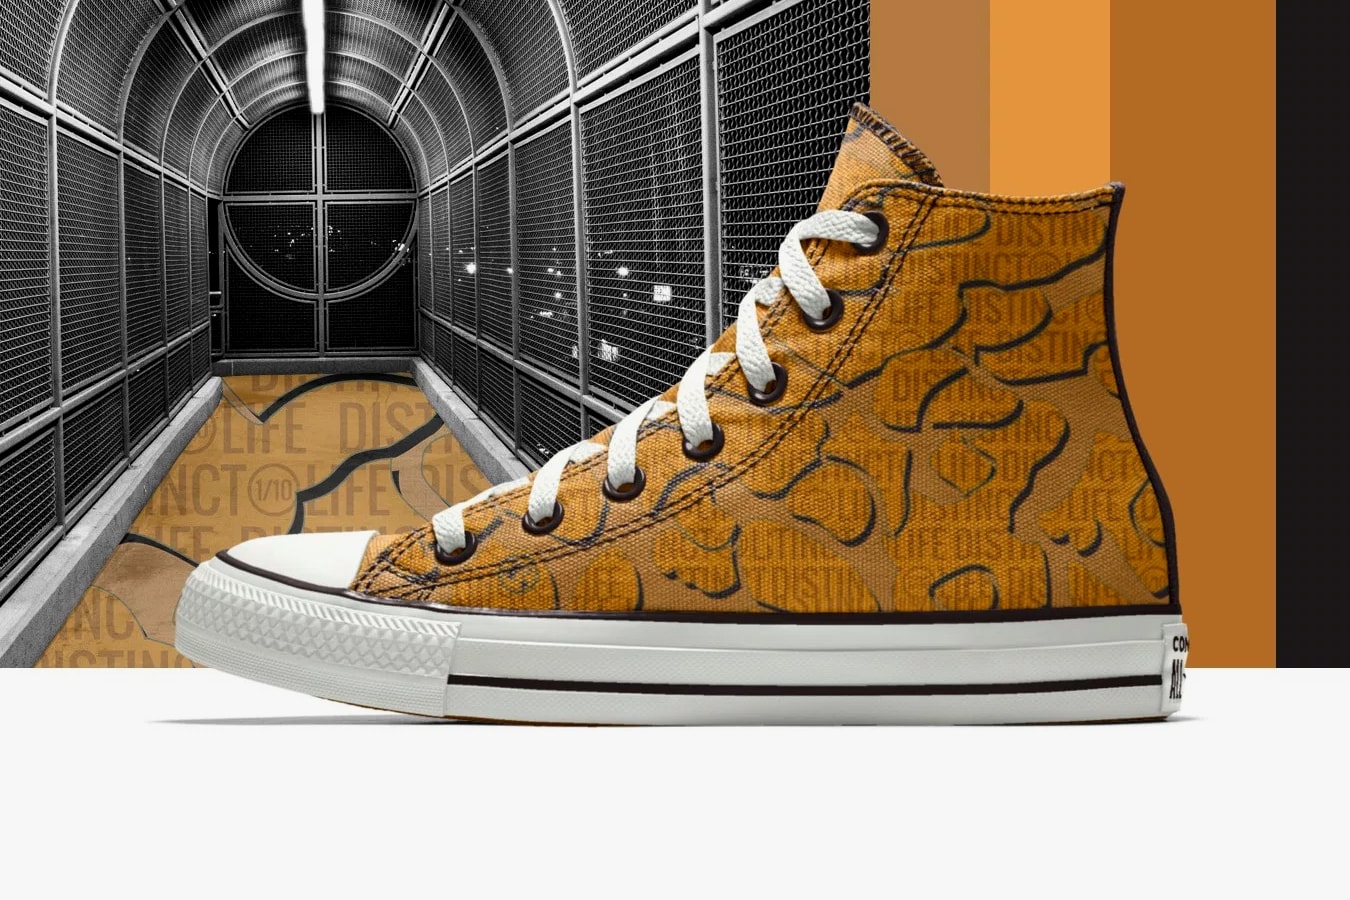 The DISTINCT LIFE  Converse Chuck Taylor New Collaboration spring summer 2018 april release date info drop sneakers shoes footwear black mustard colorway